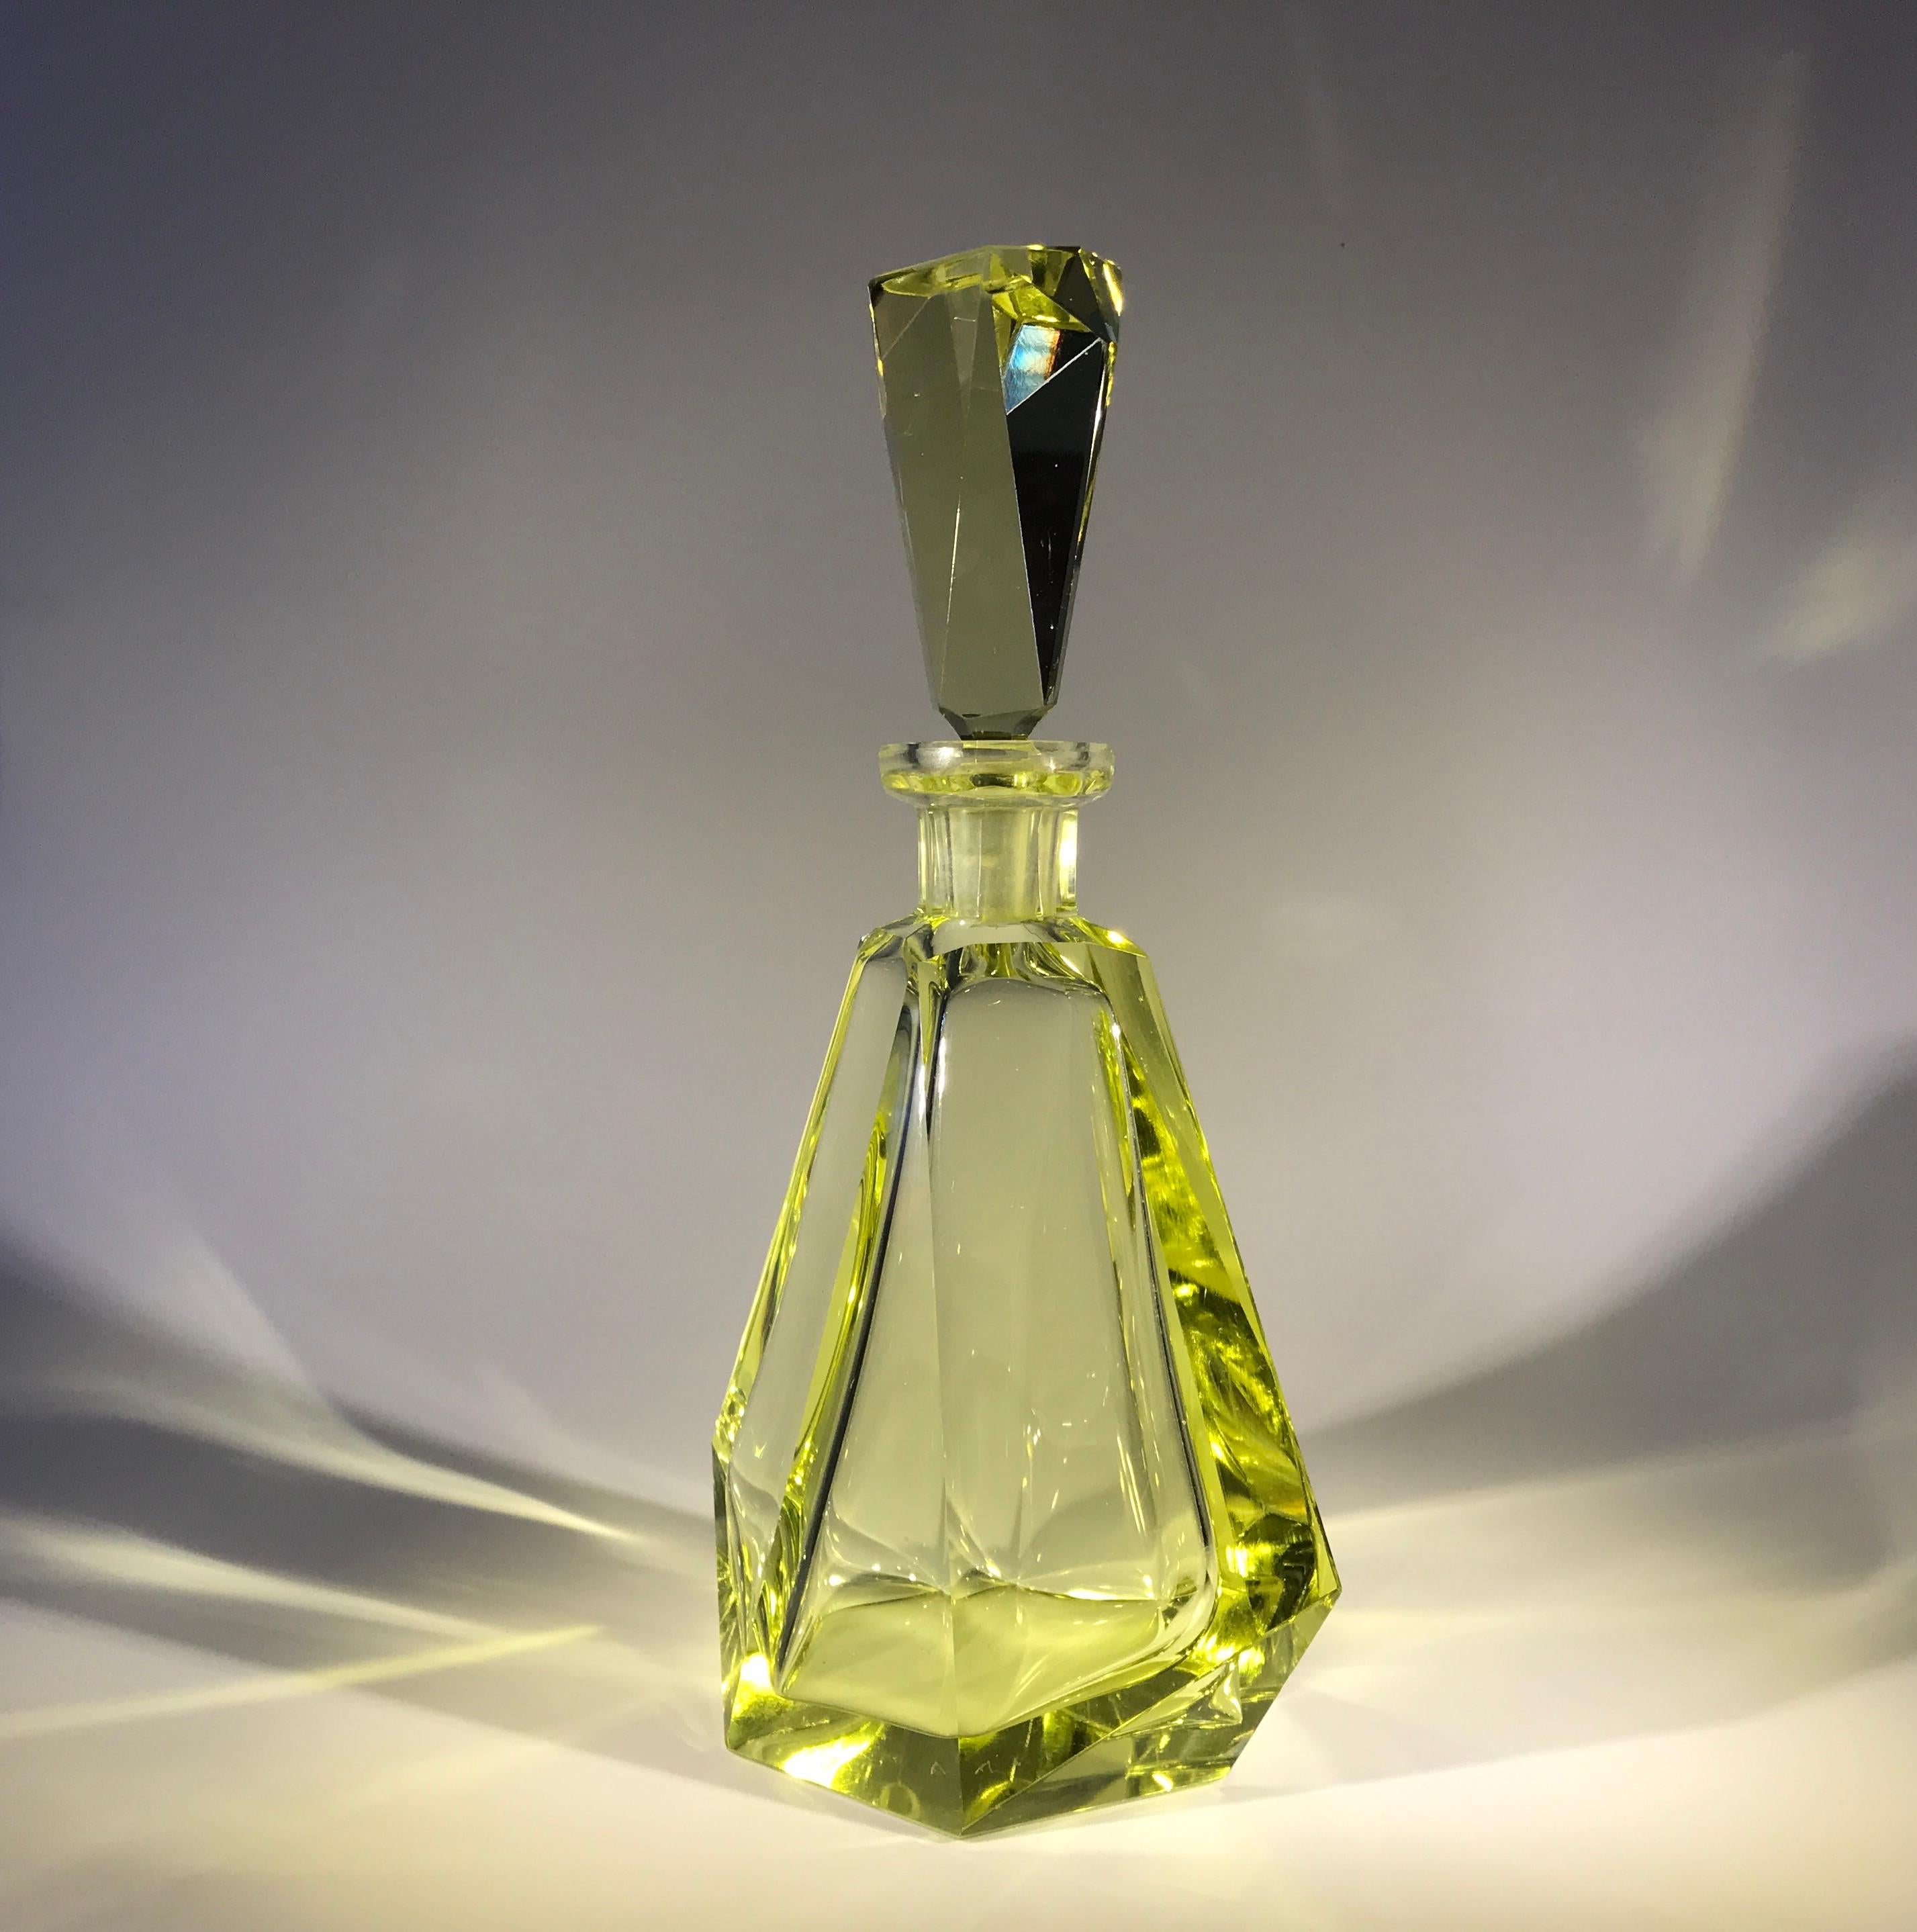 Show-stopping Chartreuse faceted crystal and Art Deco vogue decanter
Perfect size for either cologne or liqueur
A superbly stylish weighty decanter and faceted crystal stopper,
Vintage Bohemian, Czech crystal 
circa midcentury
Decanter height